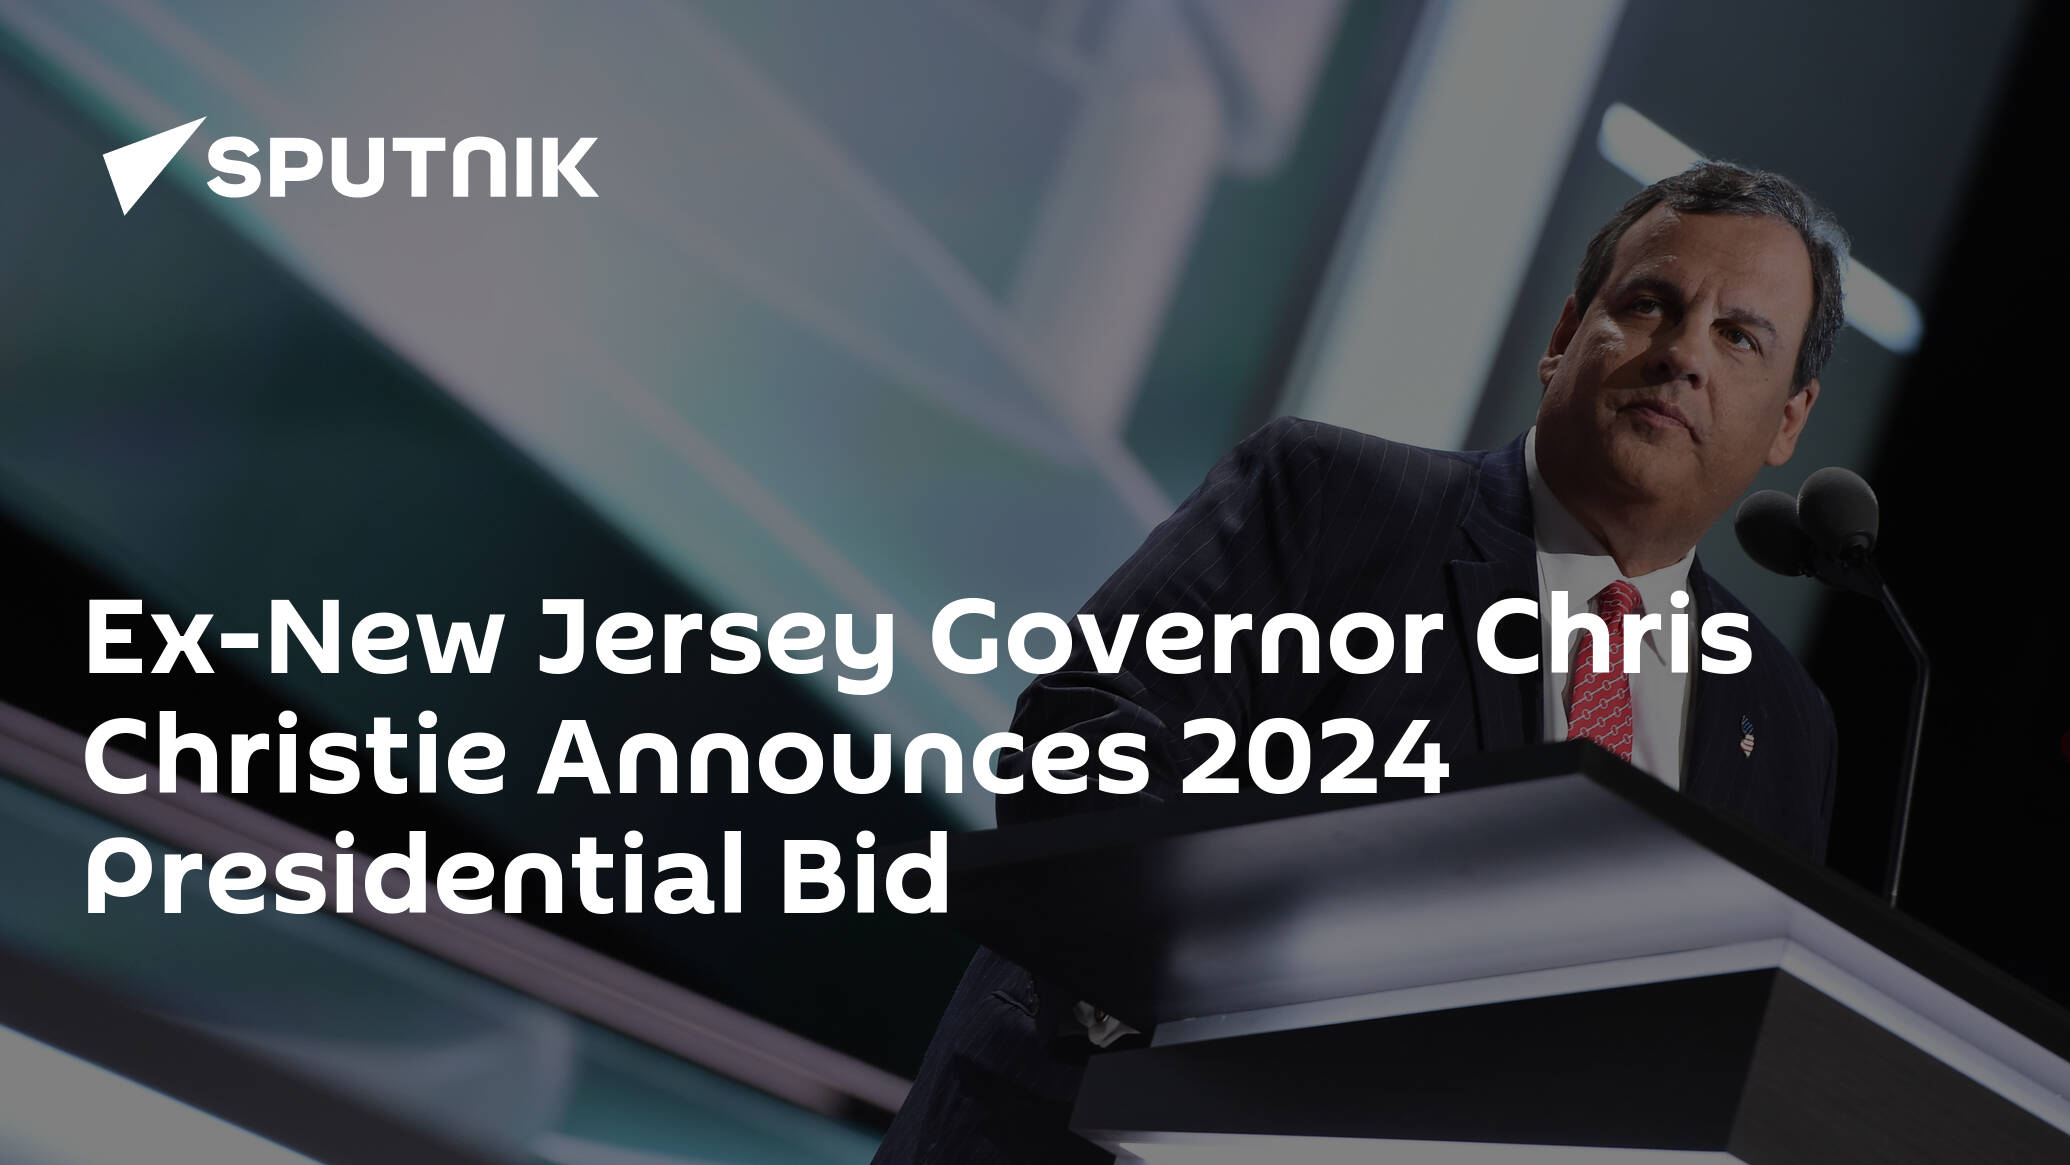 Ex-New Jersey Governor Chris Christie Files Paperwork for 2024 Presidential Bid